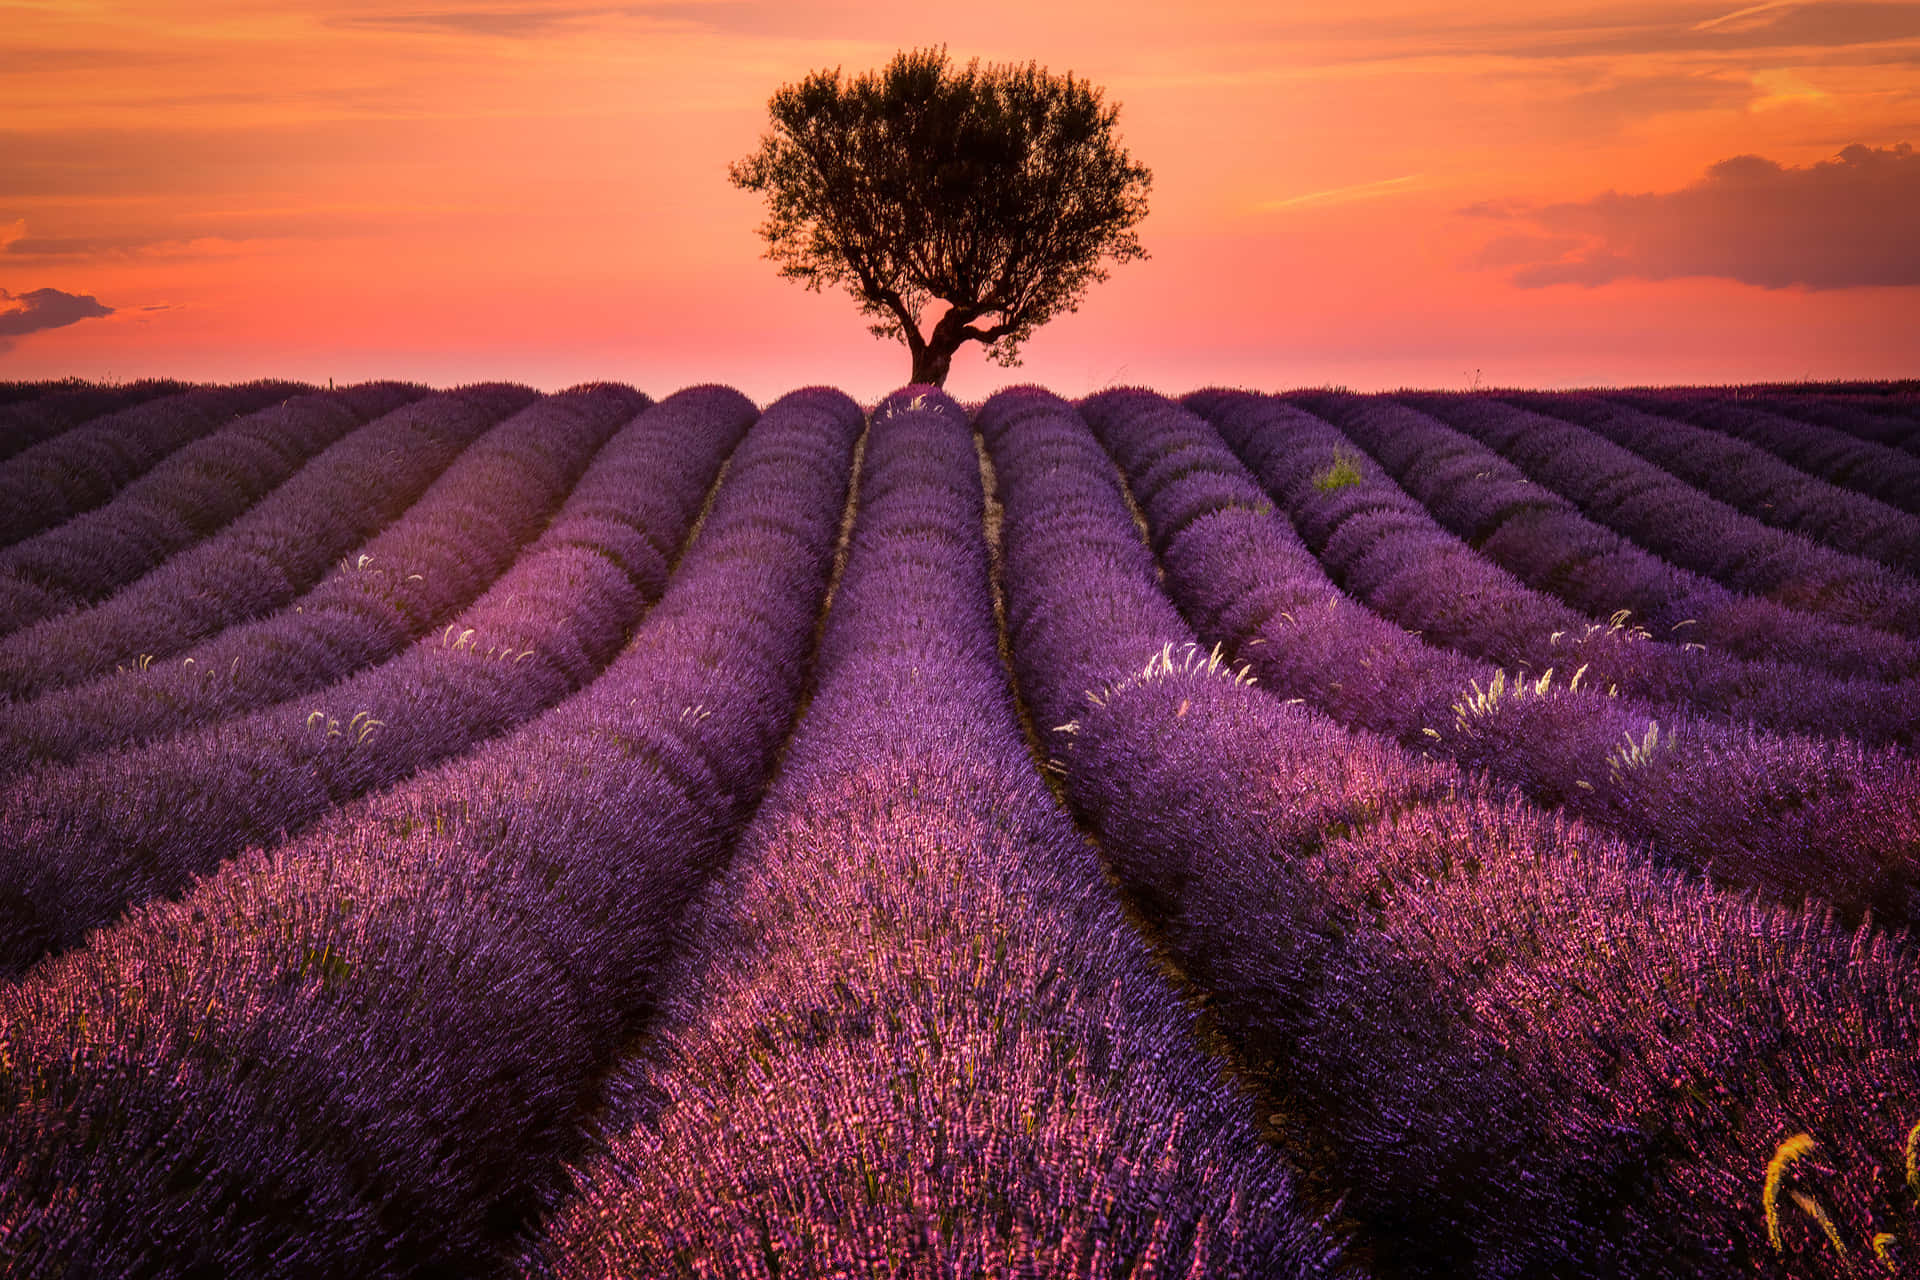 Download wallpaper 840x1336 lavenders lavender farm plants iphone 5  iphone 5s iphone 5c ipod touch 840x1336 hd background 21675